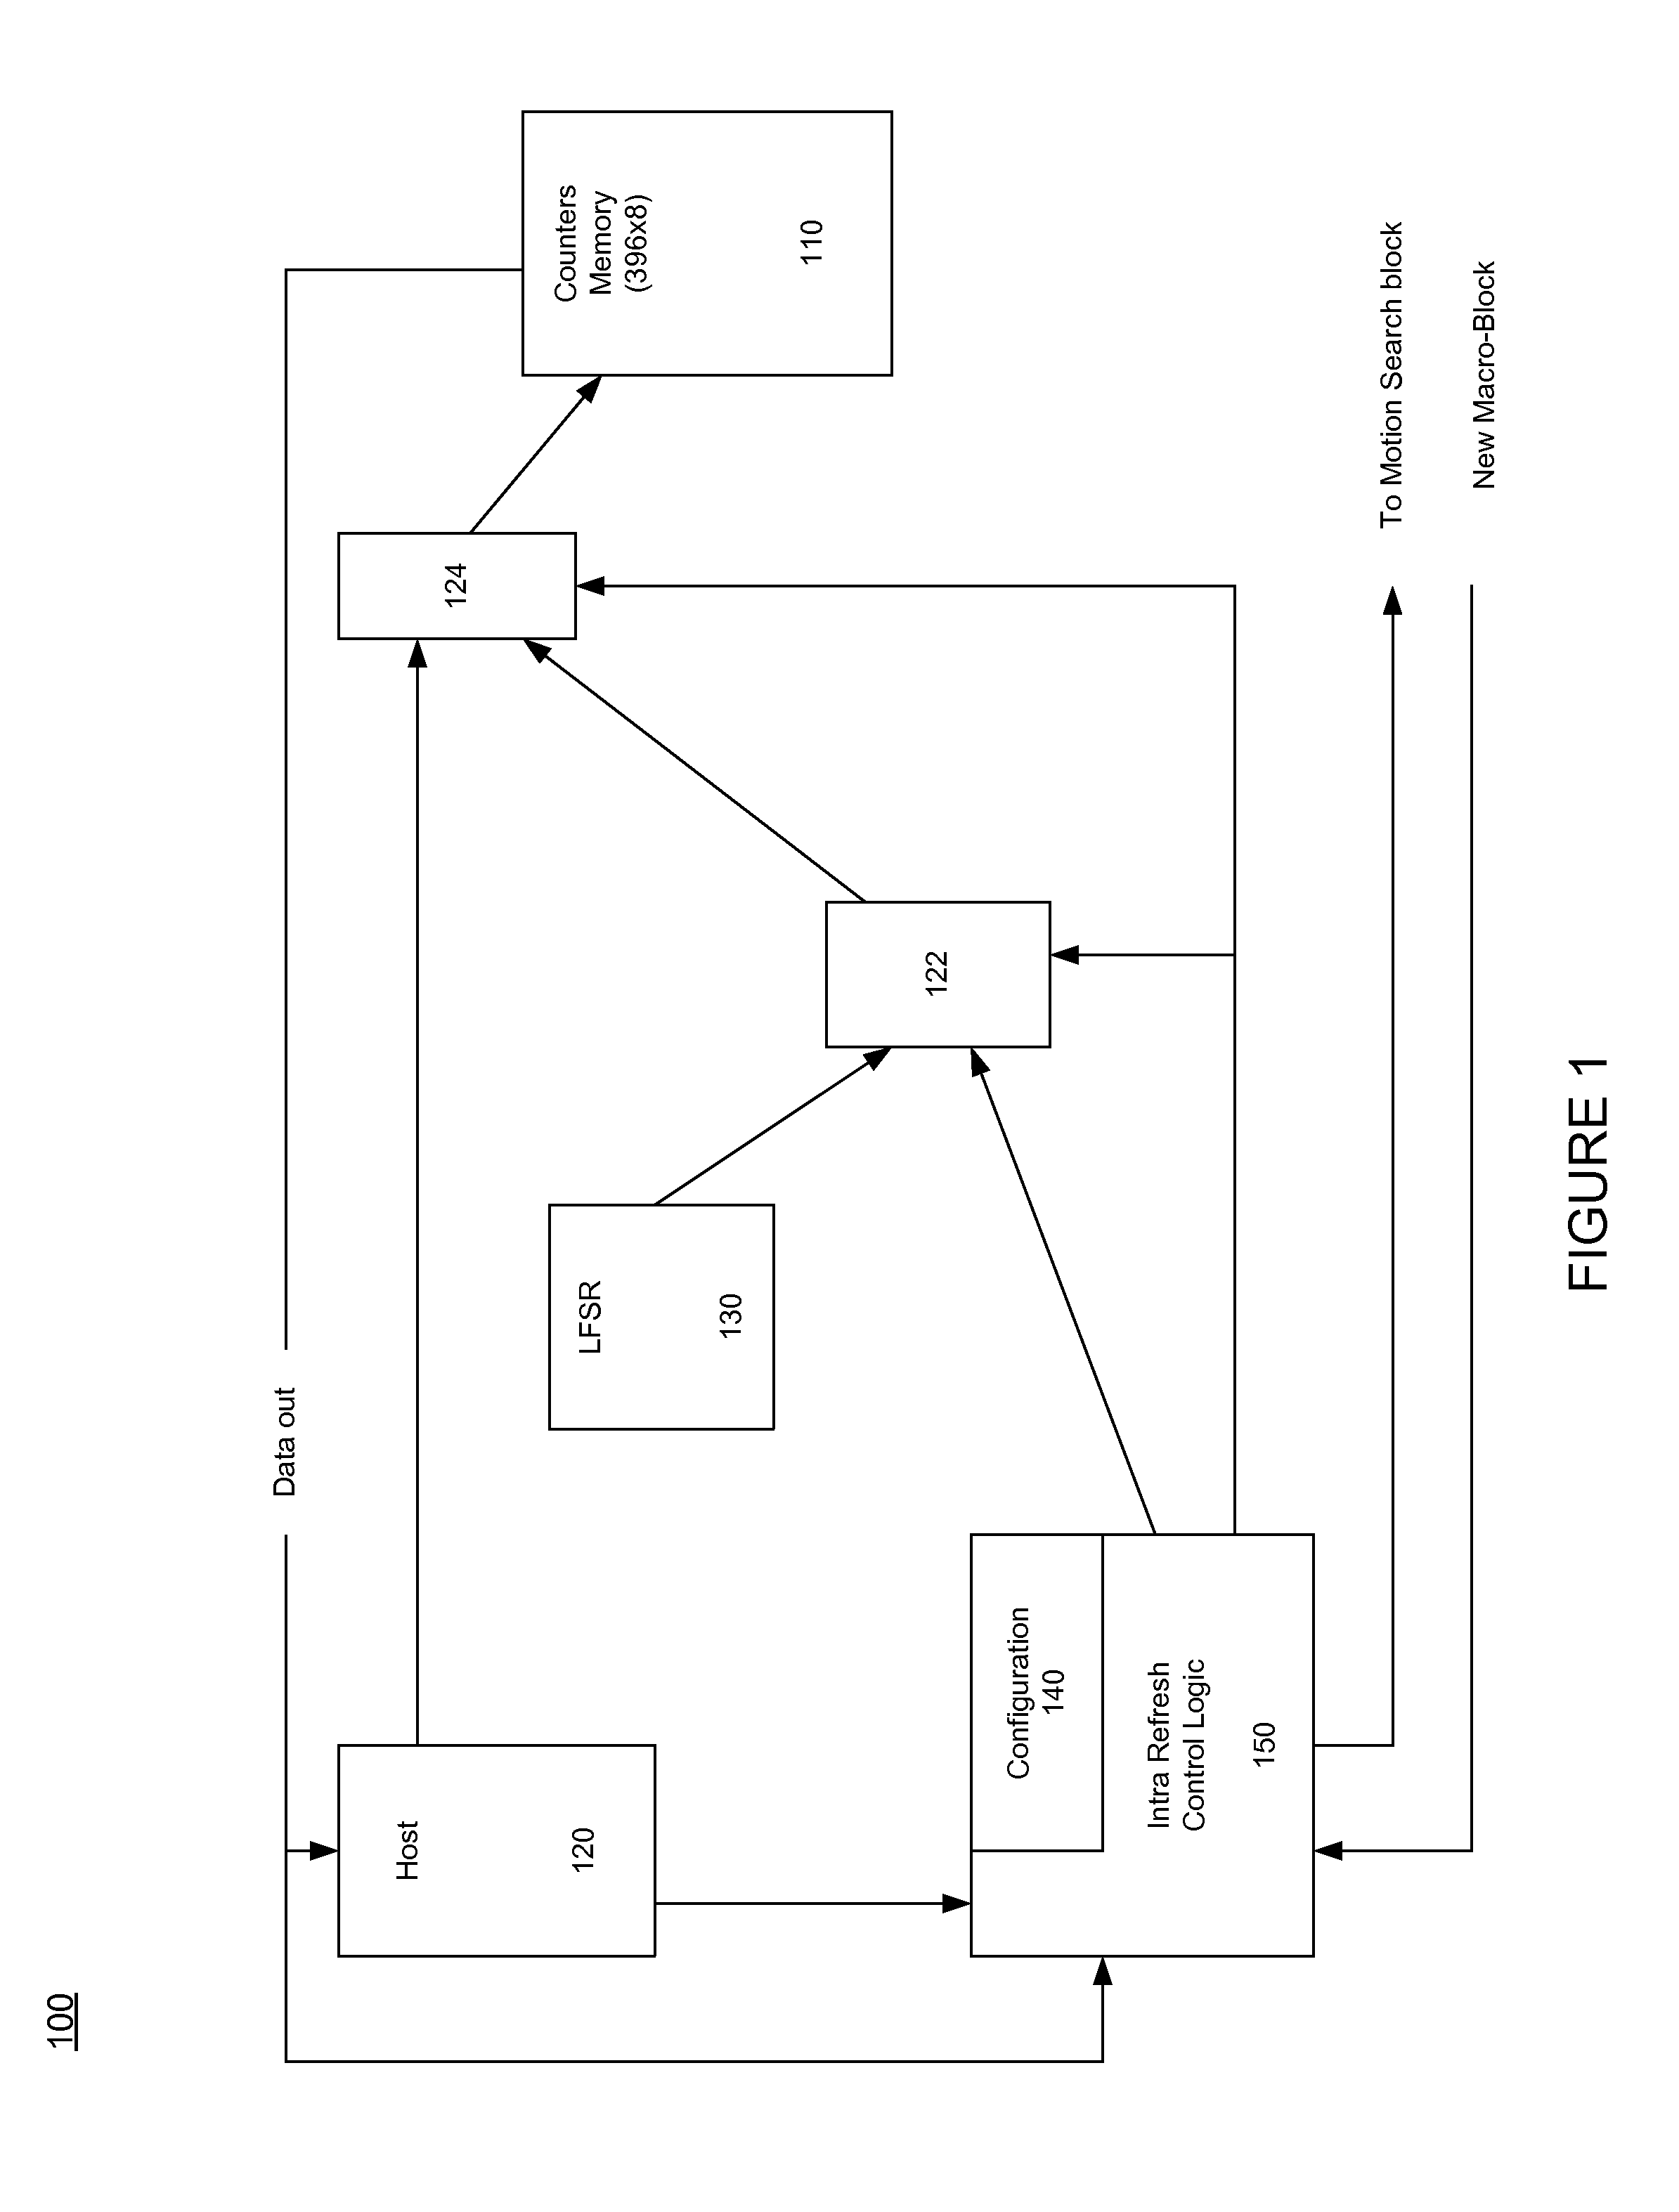 System and method for intra refresh implementation with pseudo random number generation